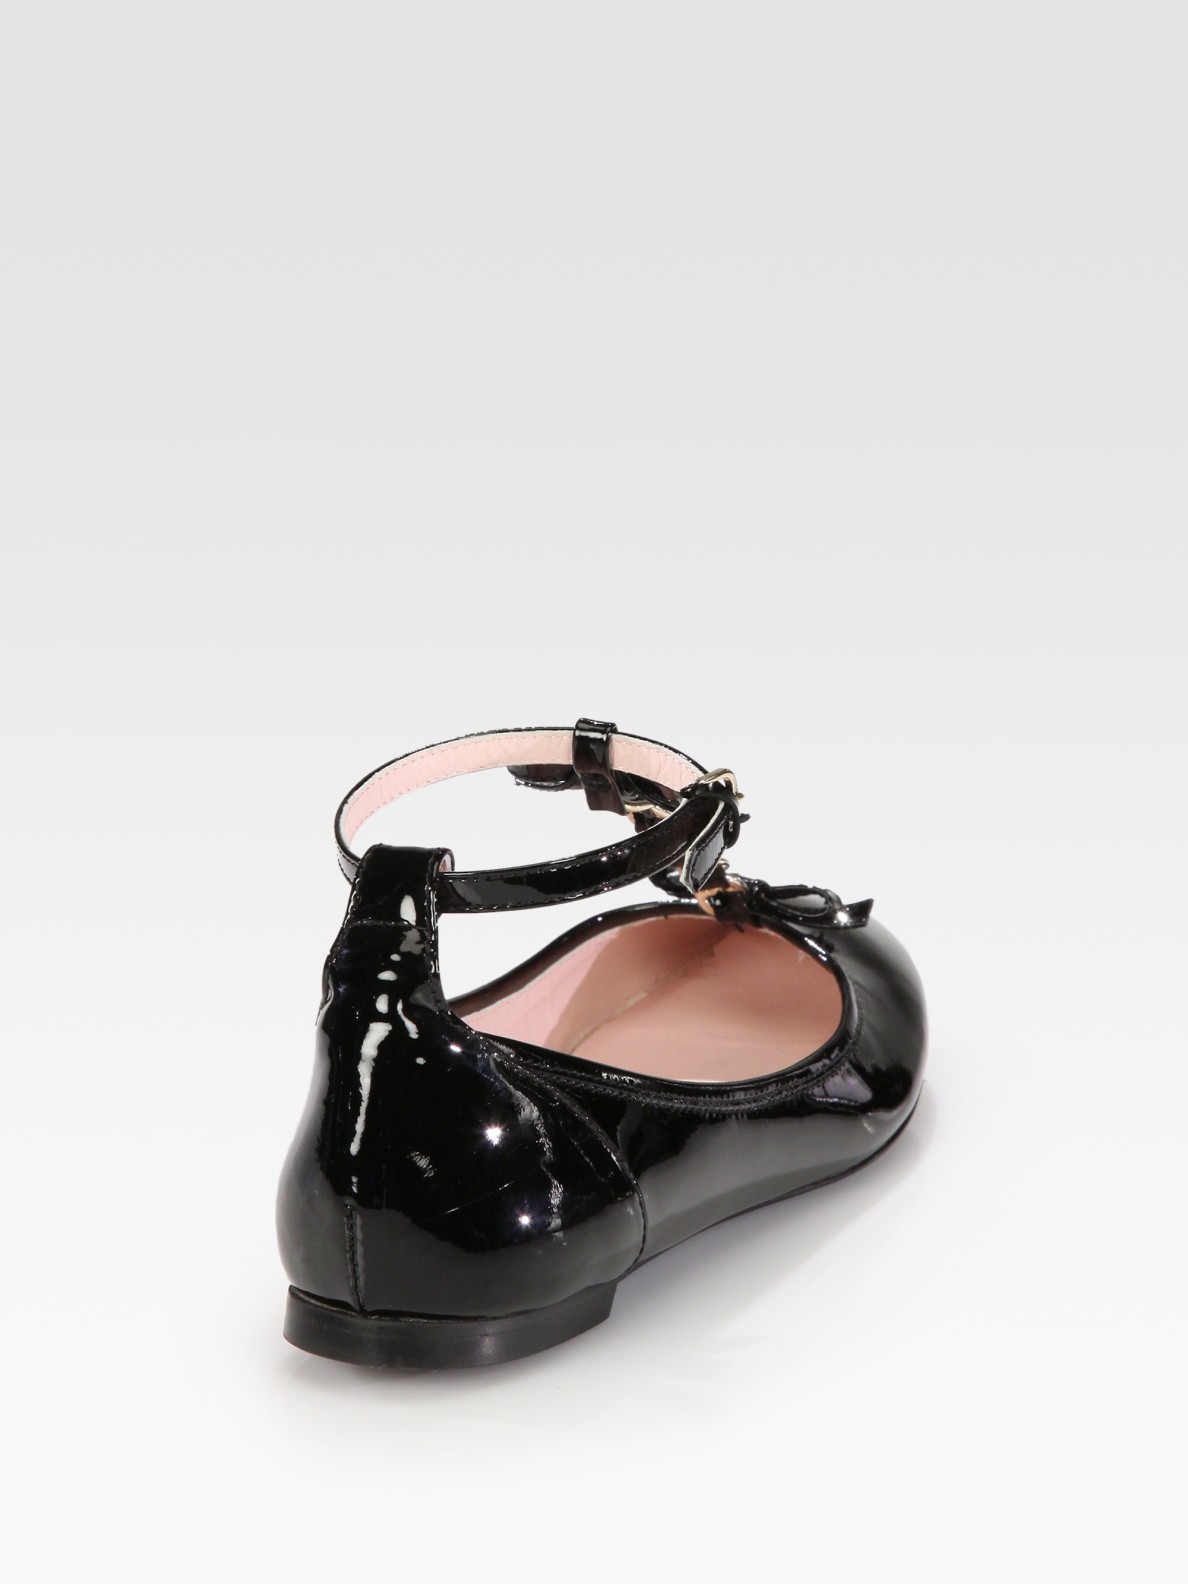 Red valentino Patent Leather Bow T-Strap Ballet Flats in 